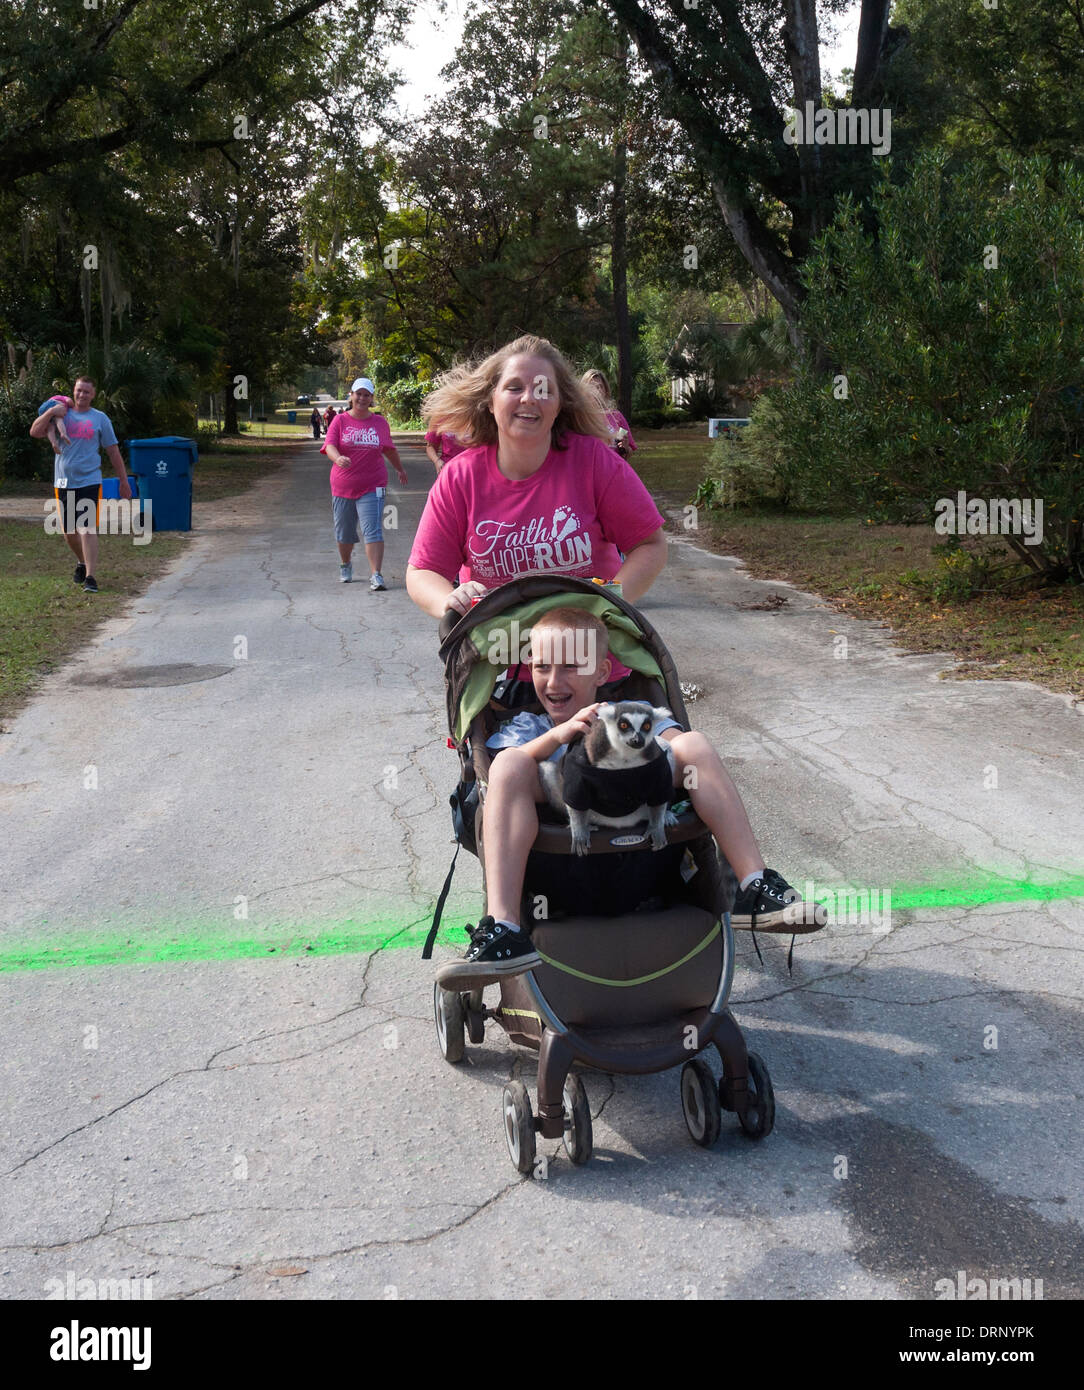 Crossing finish line at Crossroads Pregnancy Center annual 5K walk / run charity race in High Springs, Florida. Stock Photo